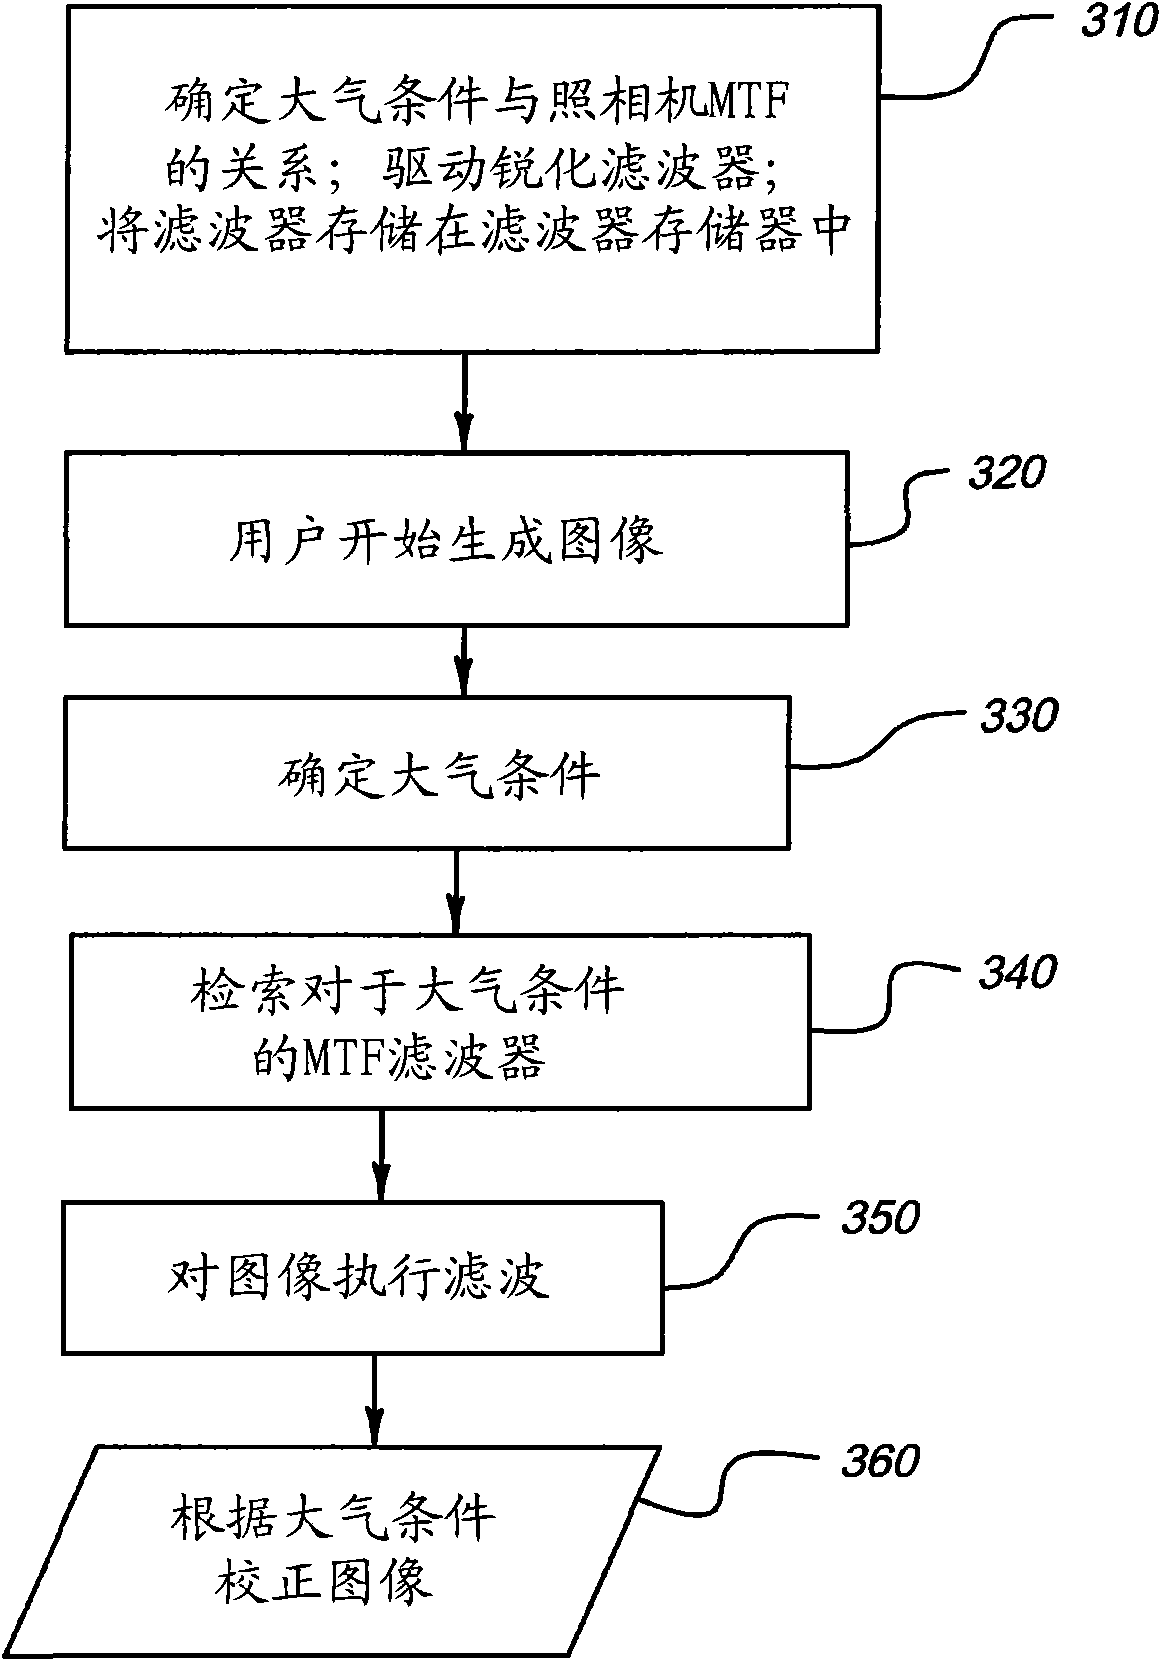 Condition dependent sharpening in an imaging device